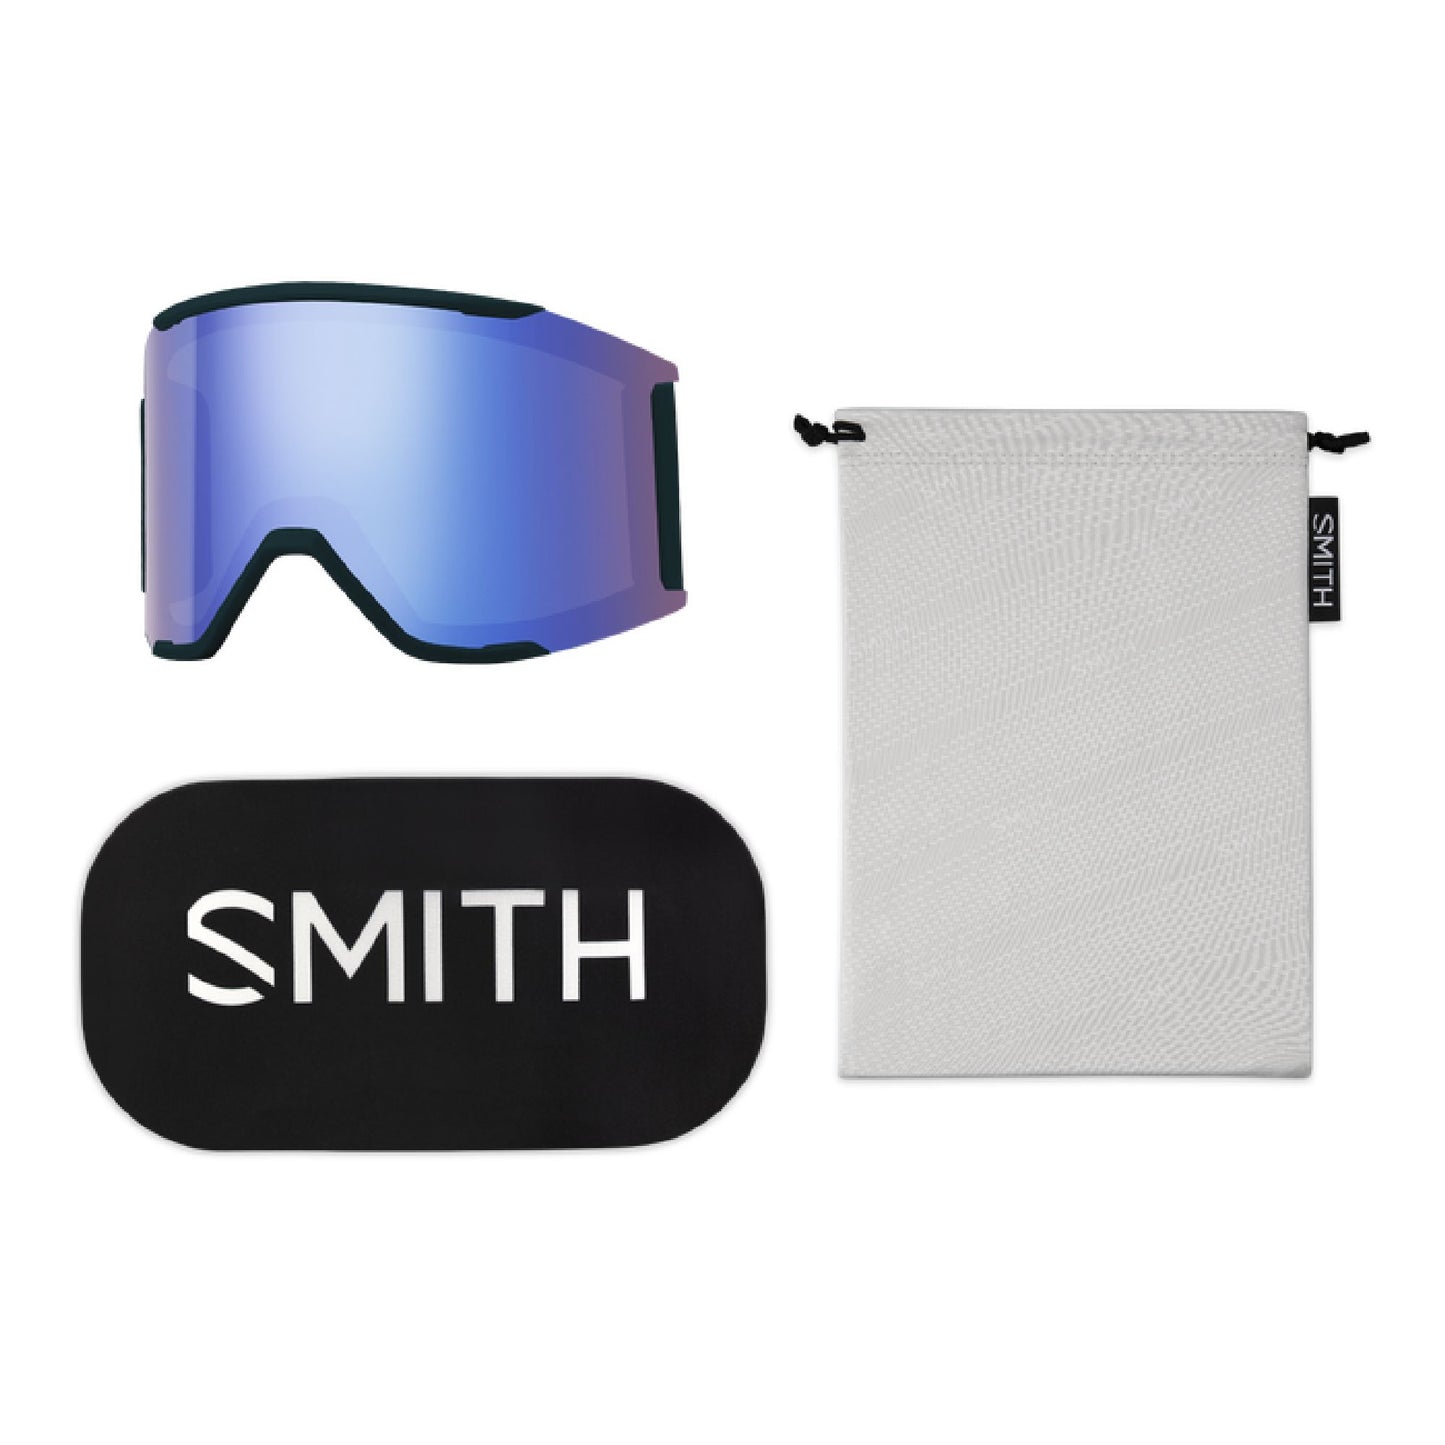 Smith Squad MAG Snow Goggle Pacific Flow ChromaPop Everyday Green Mirror Snow Goggles